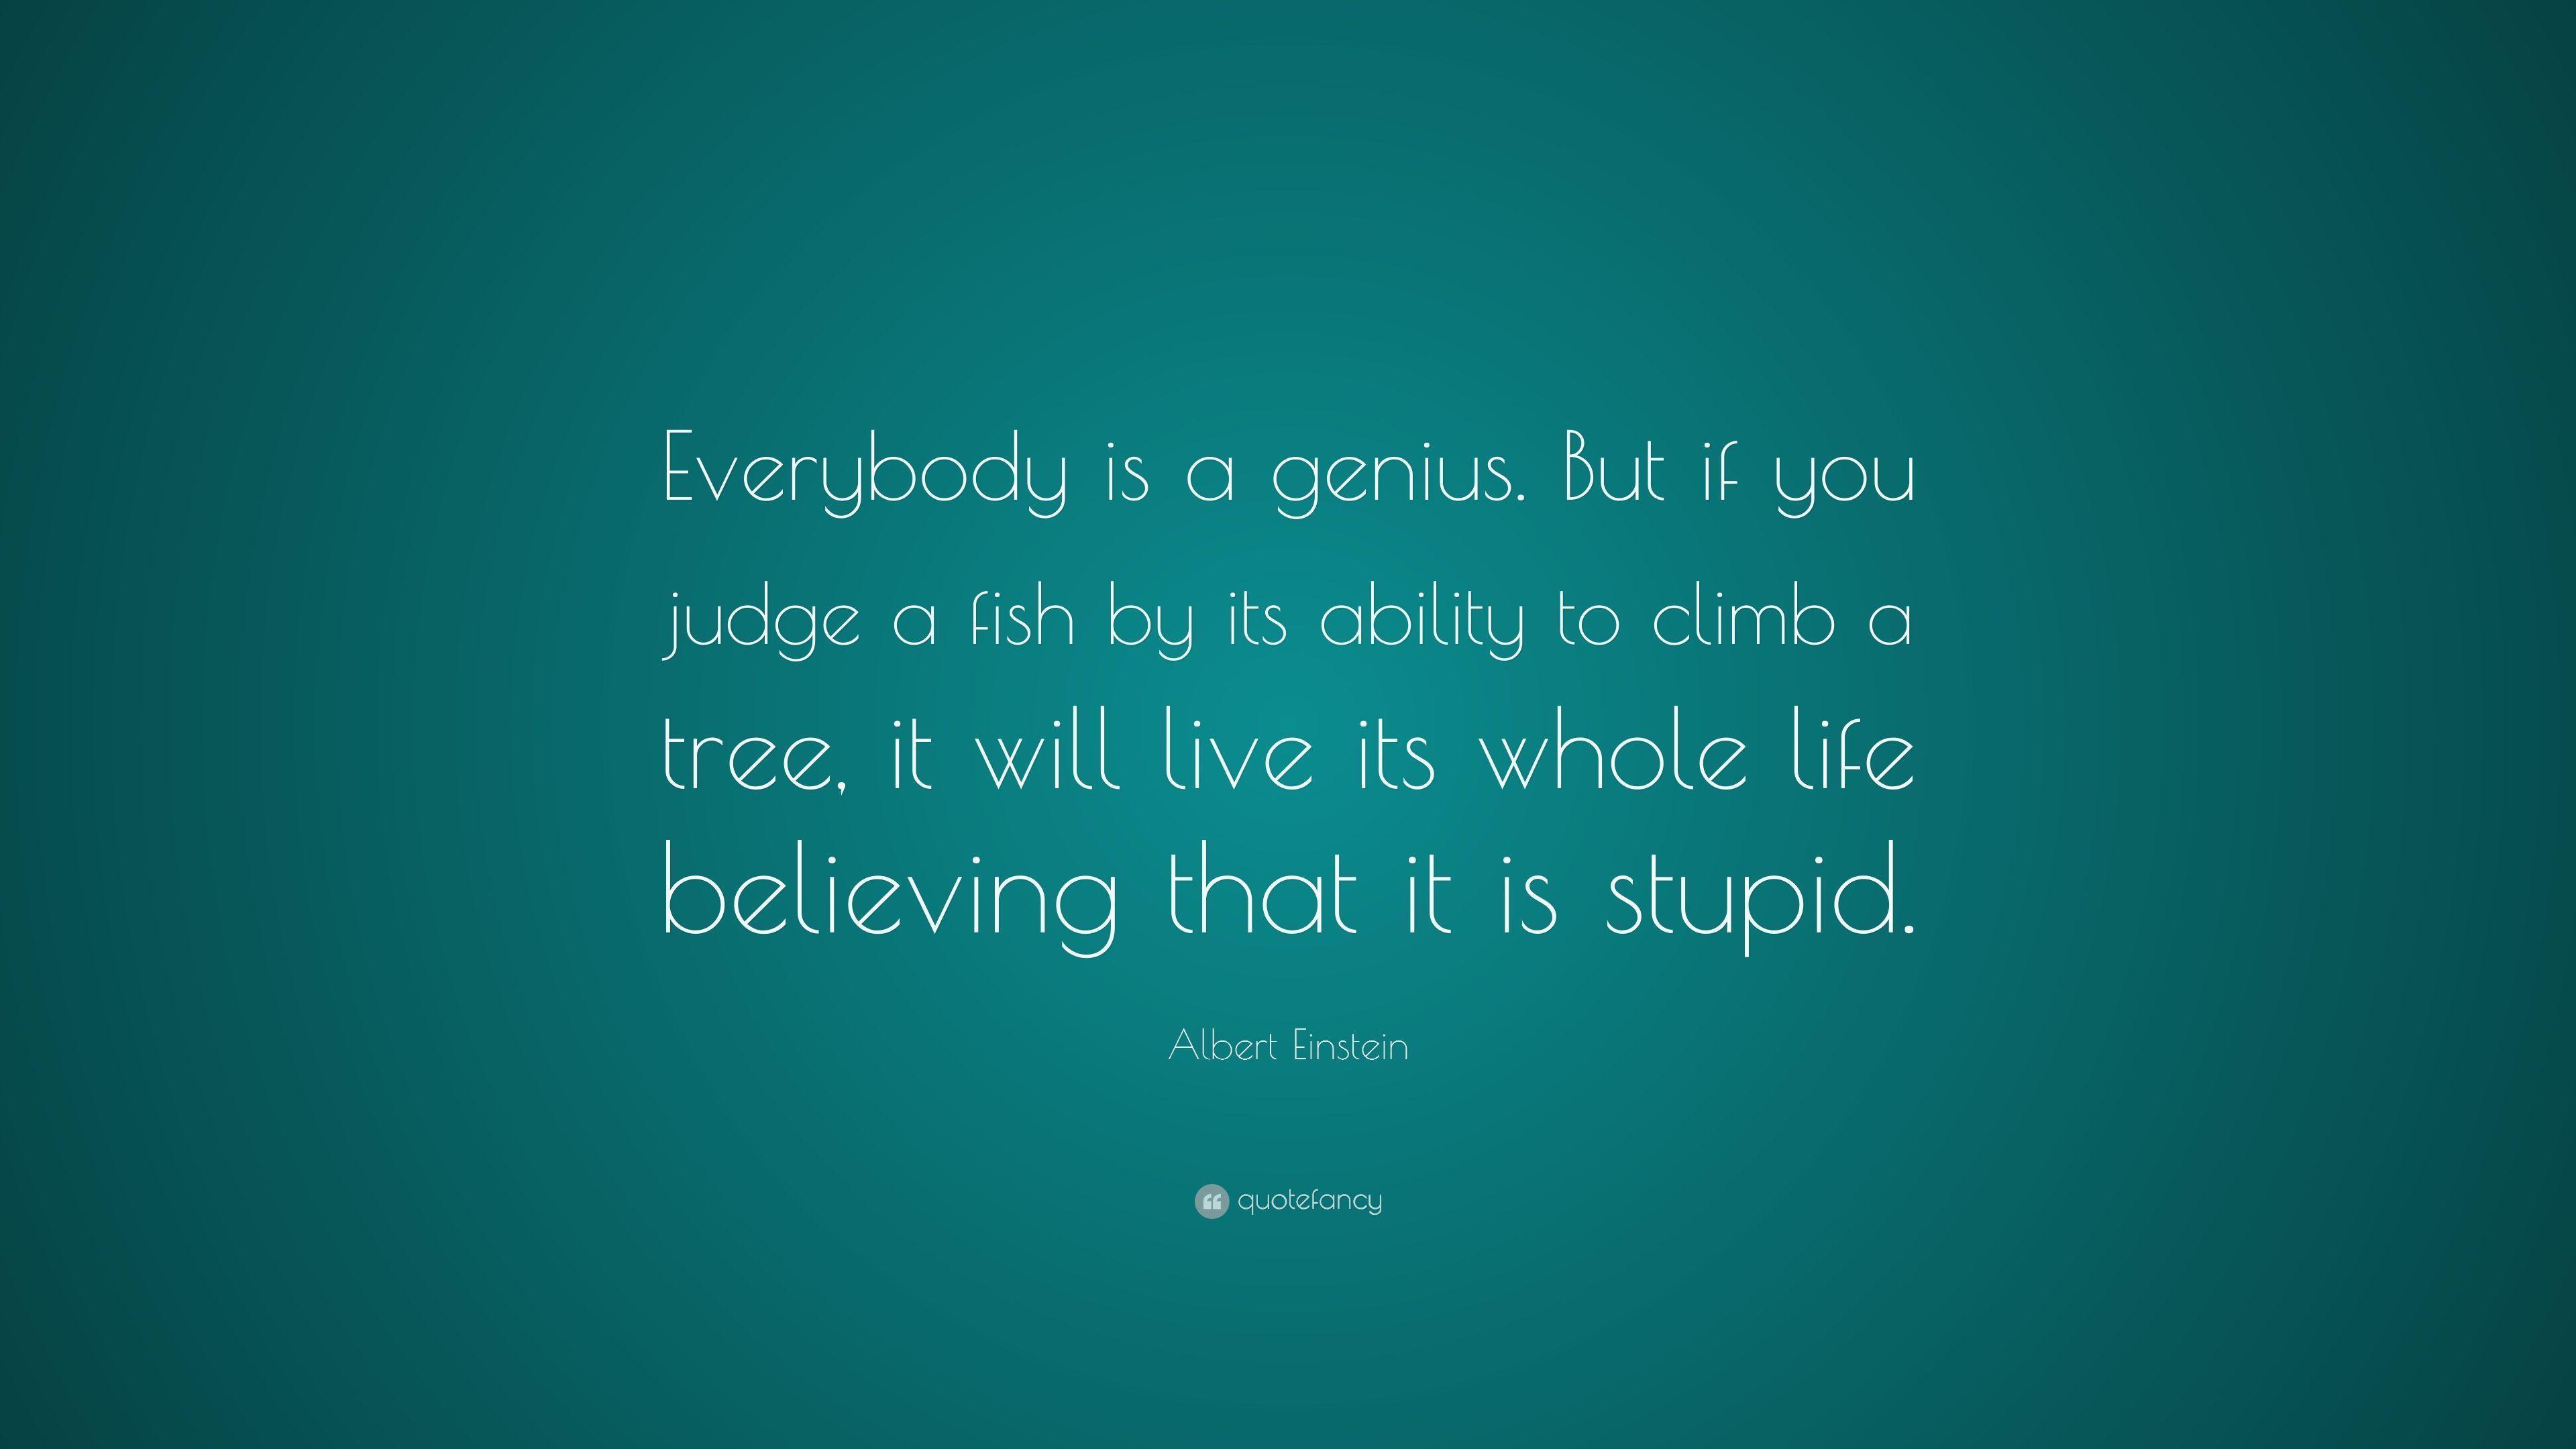 Albert Einstein Quote: “Everybody is a genius. But if you judge a